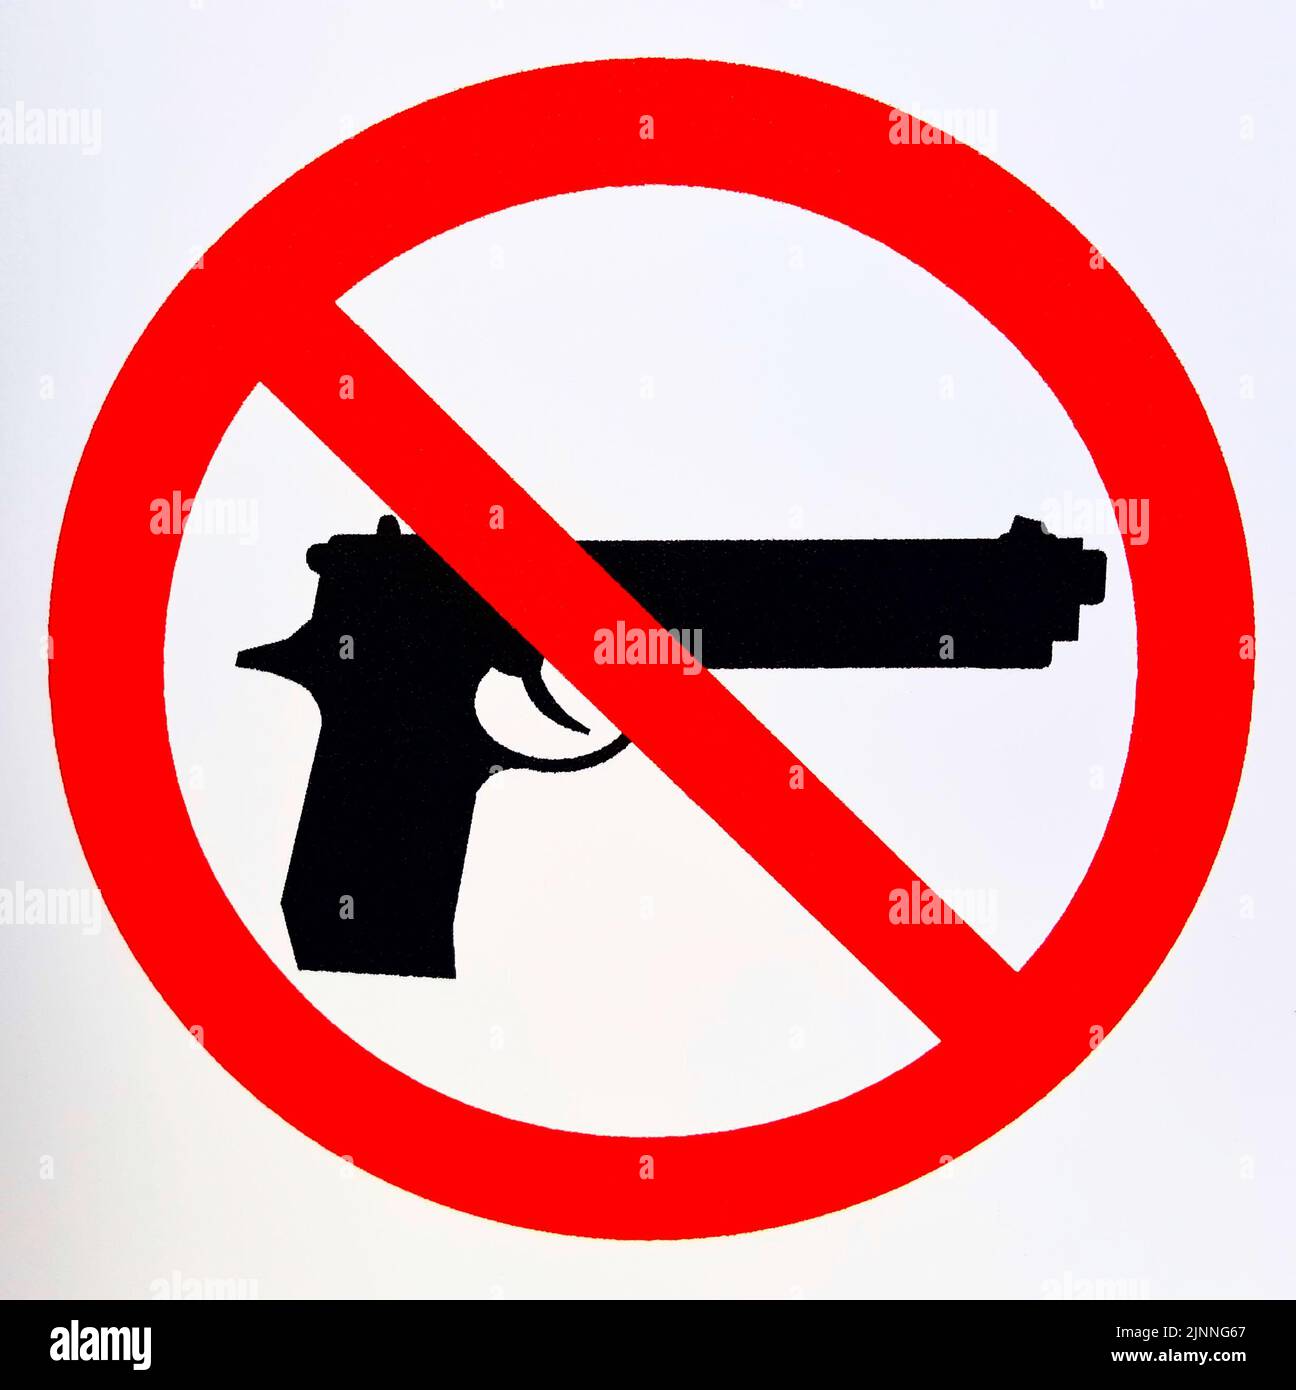 Firearms prohibited sign illustration on a white background. Gun control conceptual image. Stock Photo